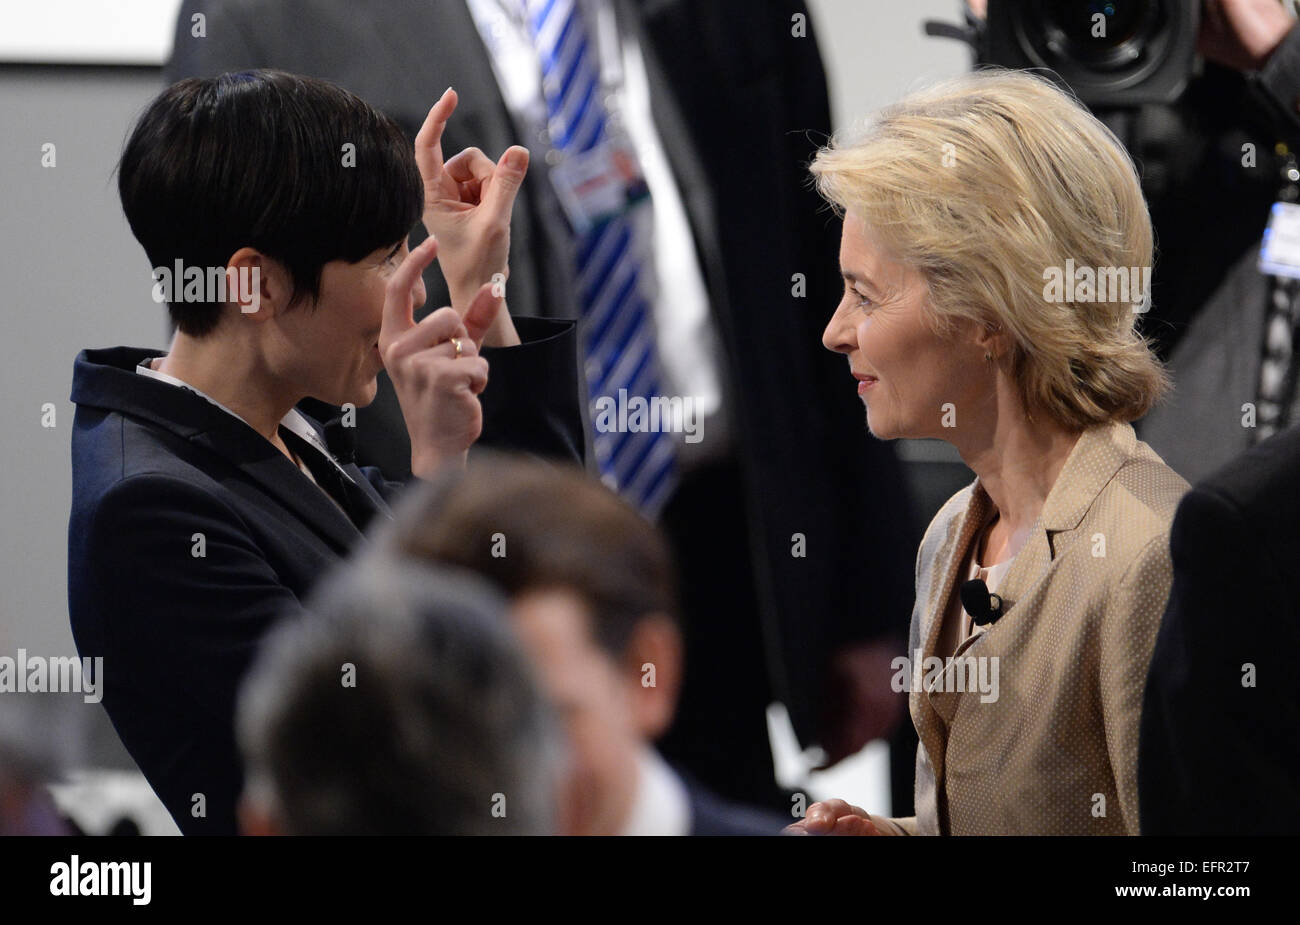 Munich, Germany. 6th Feb, 2015. German Defence Minister Ursula von der Leyen (CDU, r) welcomes her Norwegian counterpart, Ine Marie Eriksen Soreide, during the 51st Munich Security Conference in Munich, Germany, 6 February 2015. Photo: Andreas Gebert/dpa/Alamy Live News Stock Photo